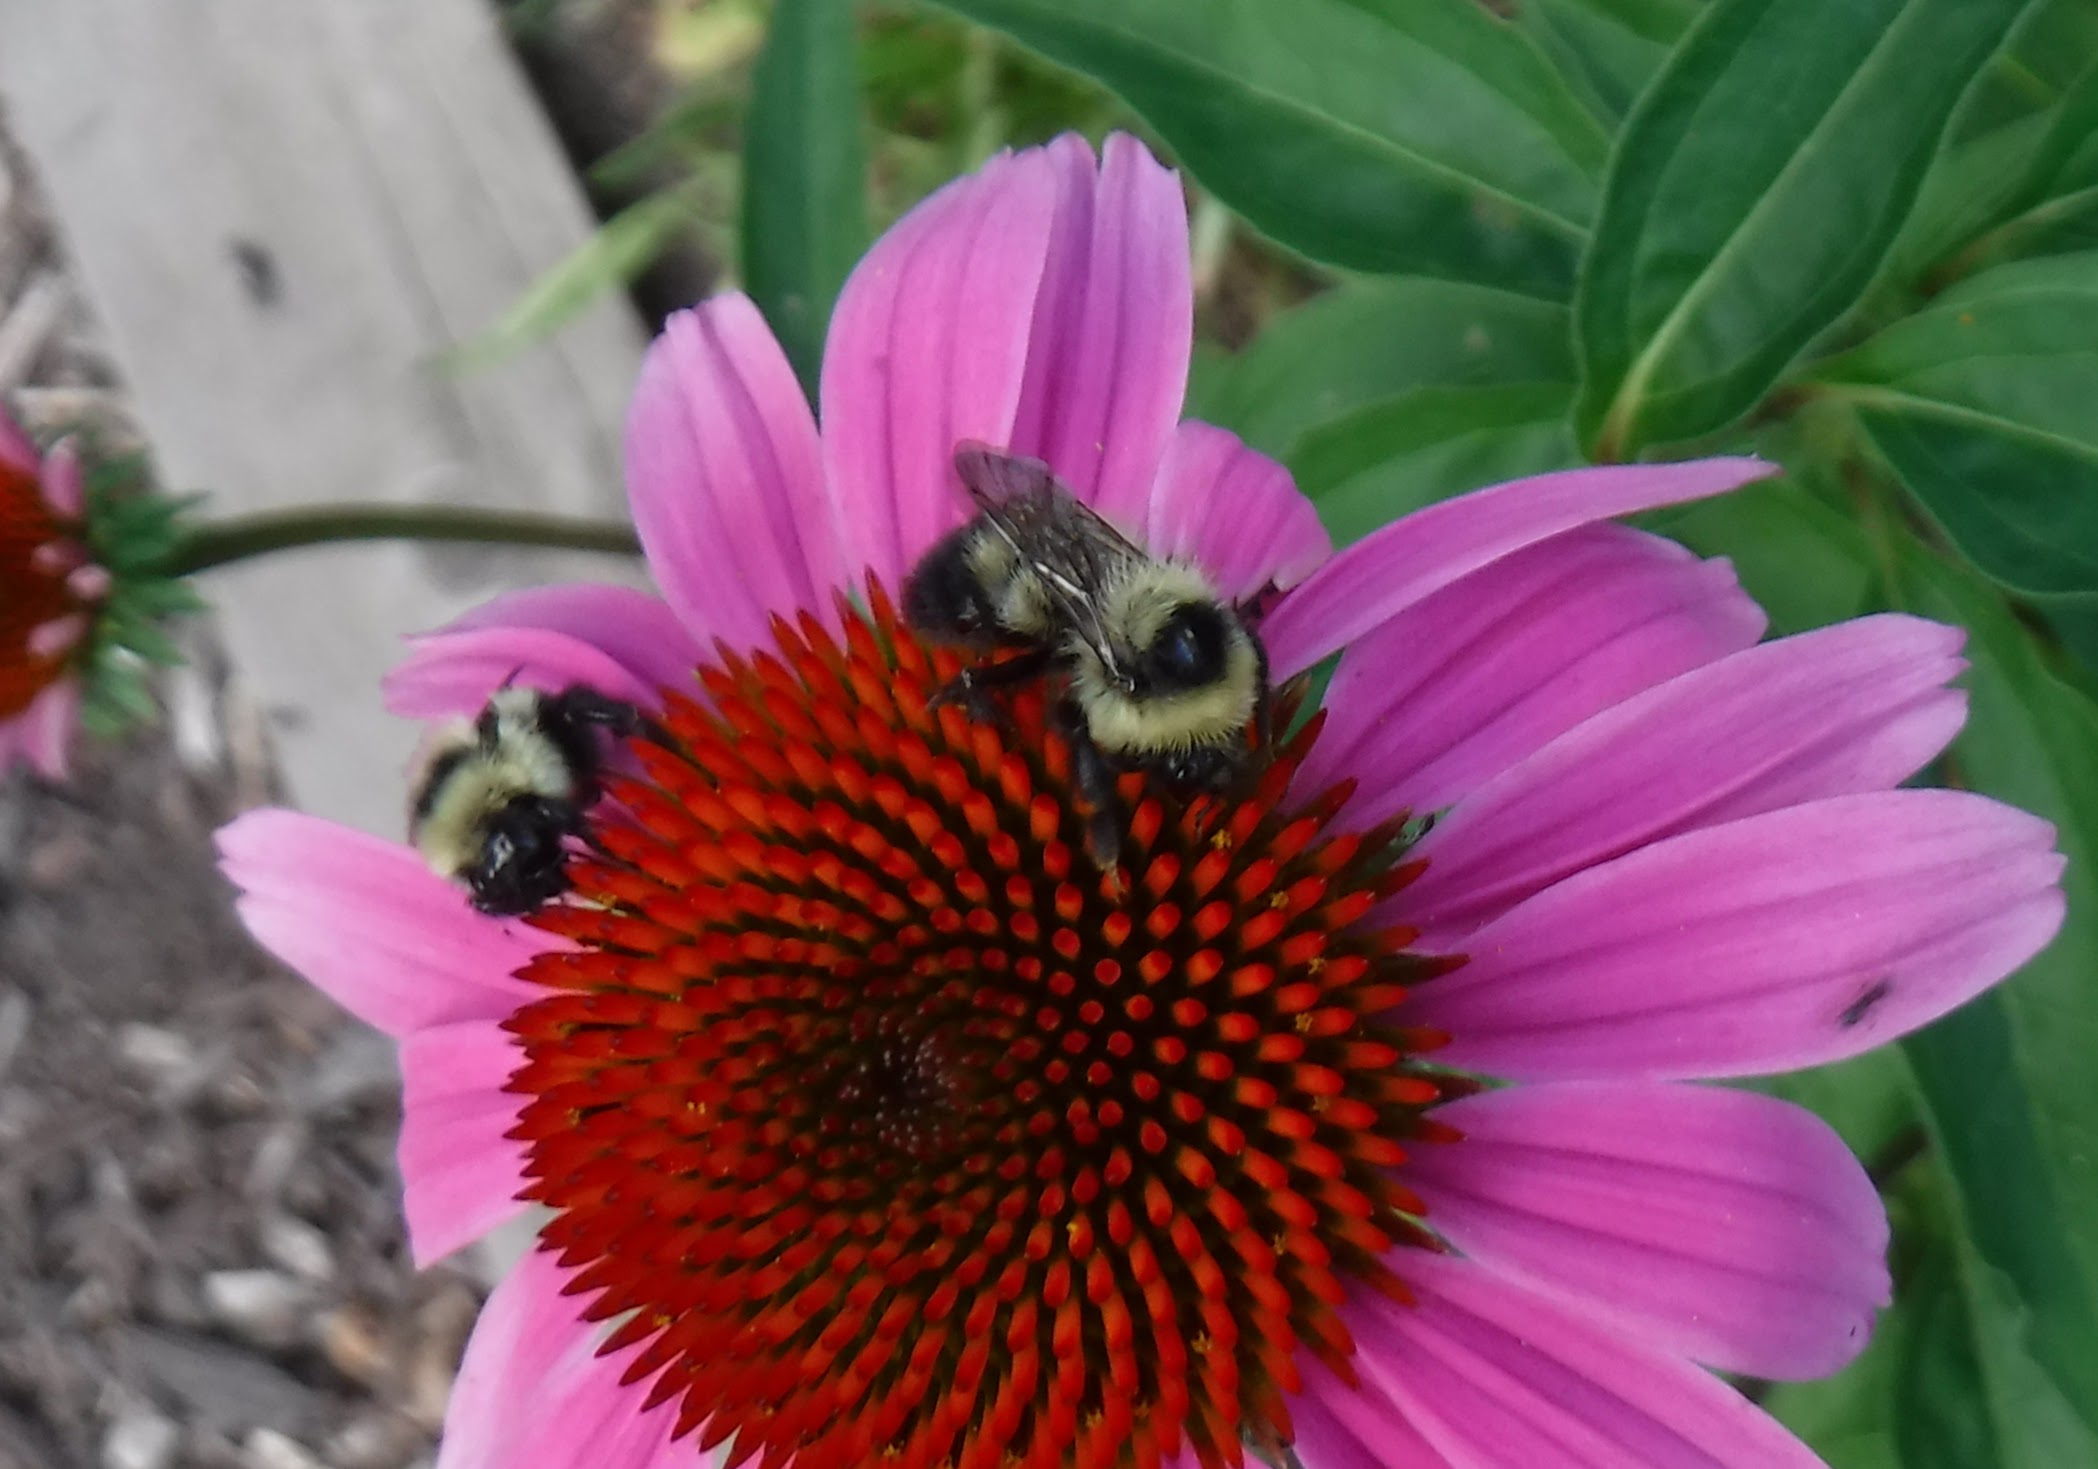 Two Spotted Bumblebees on Coneflower